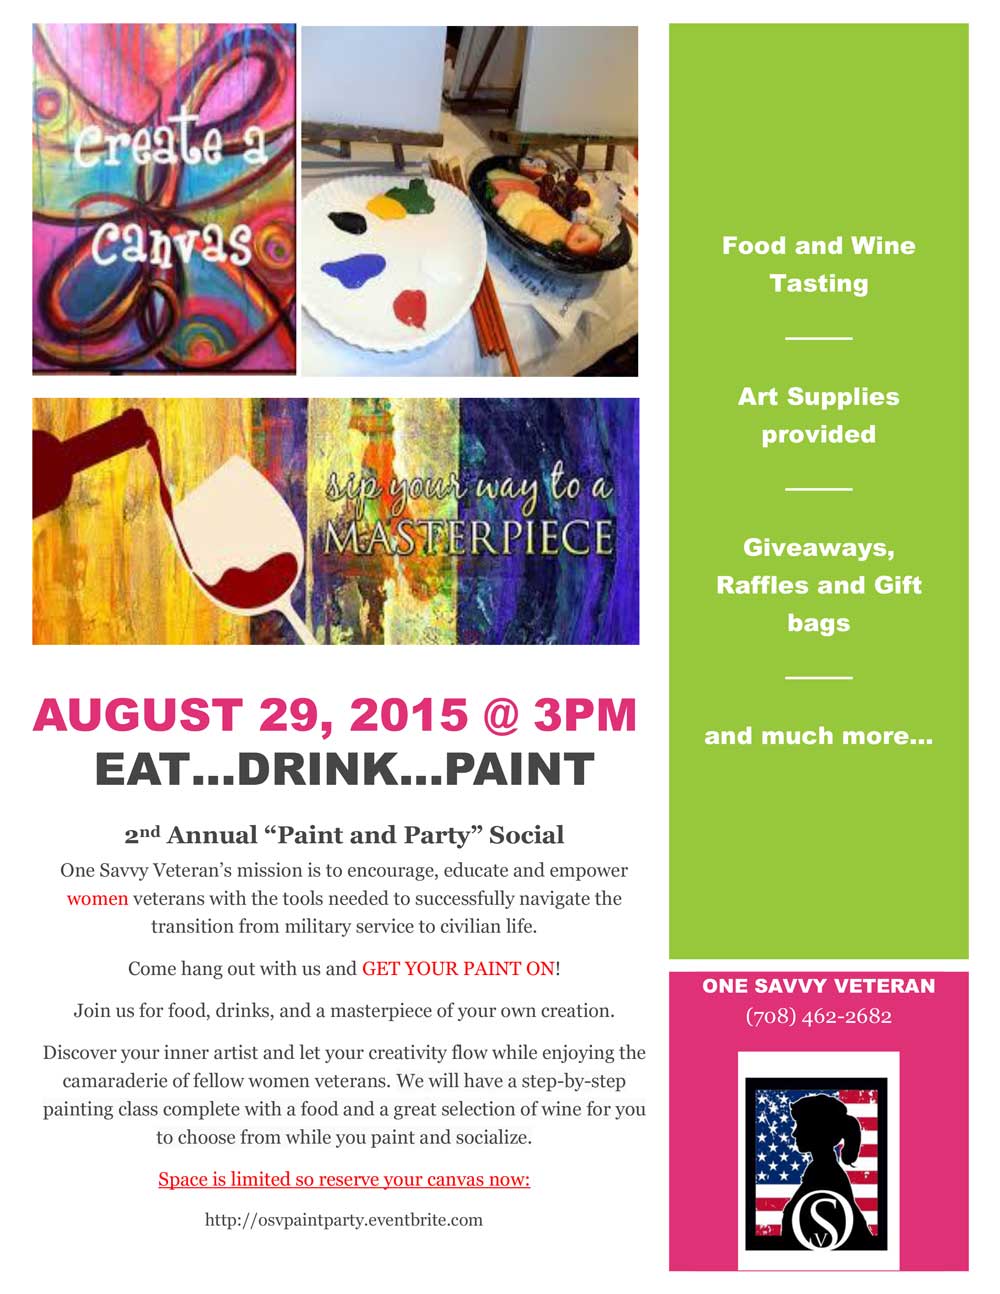 2nd Annual Eat Drink Paint Social